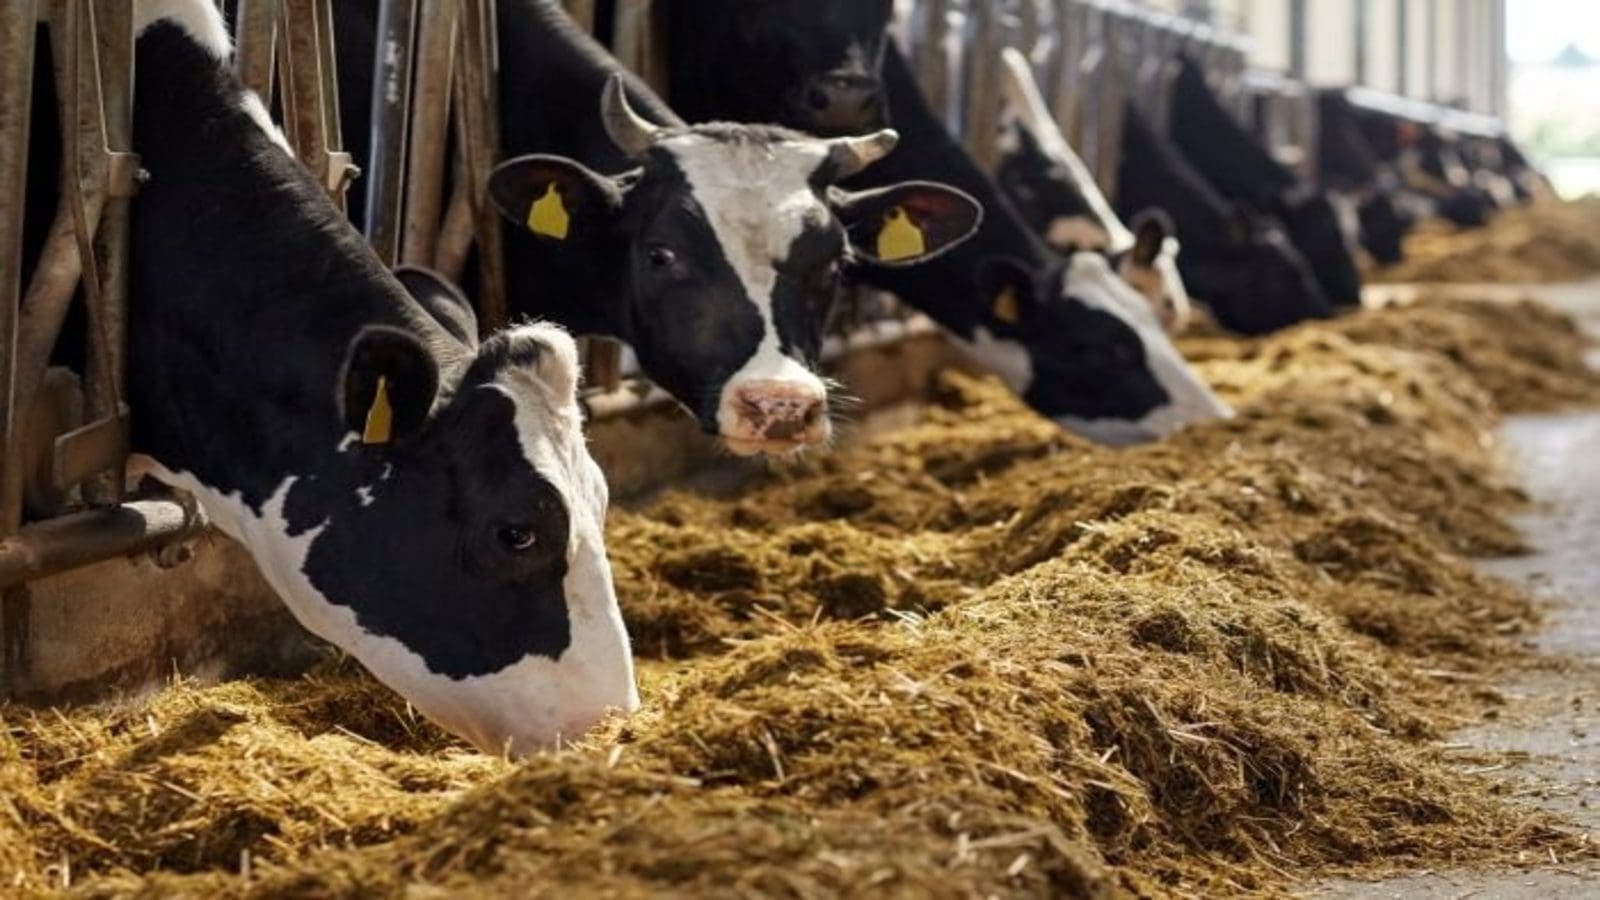 European Union faces second consecutive year of feed production decline